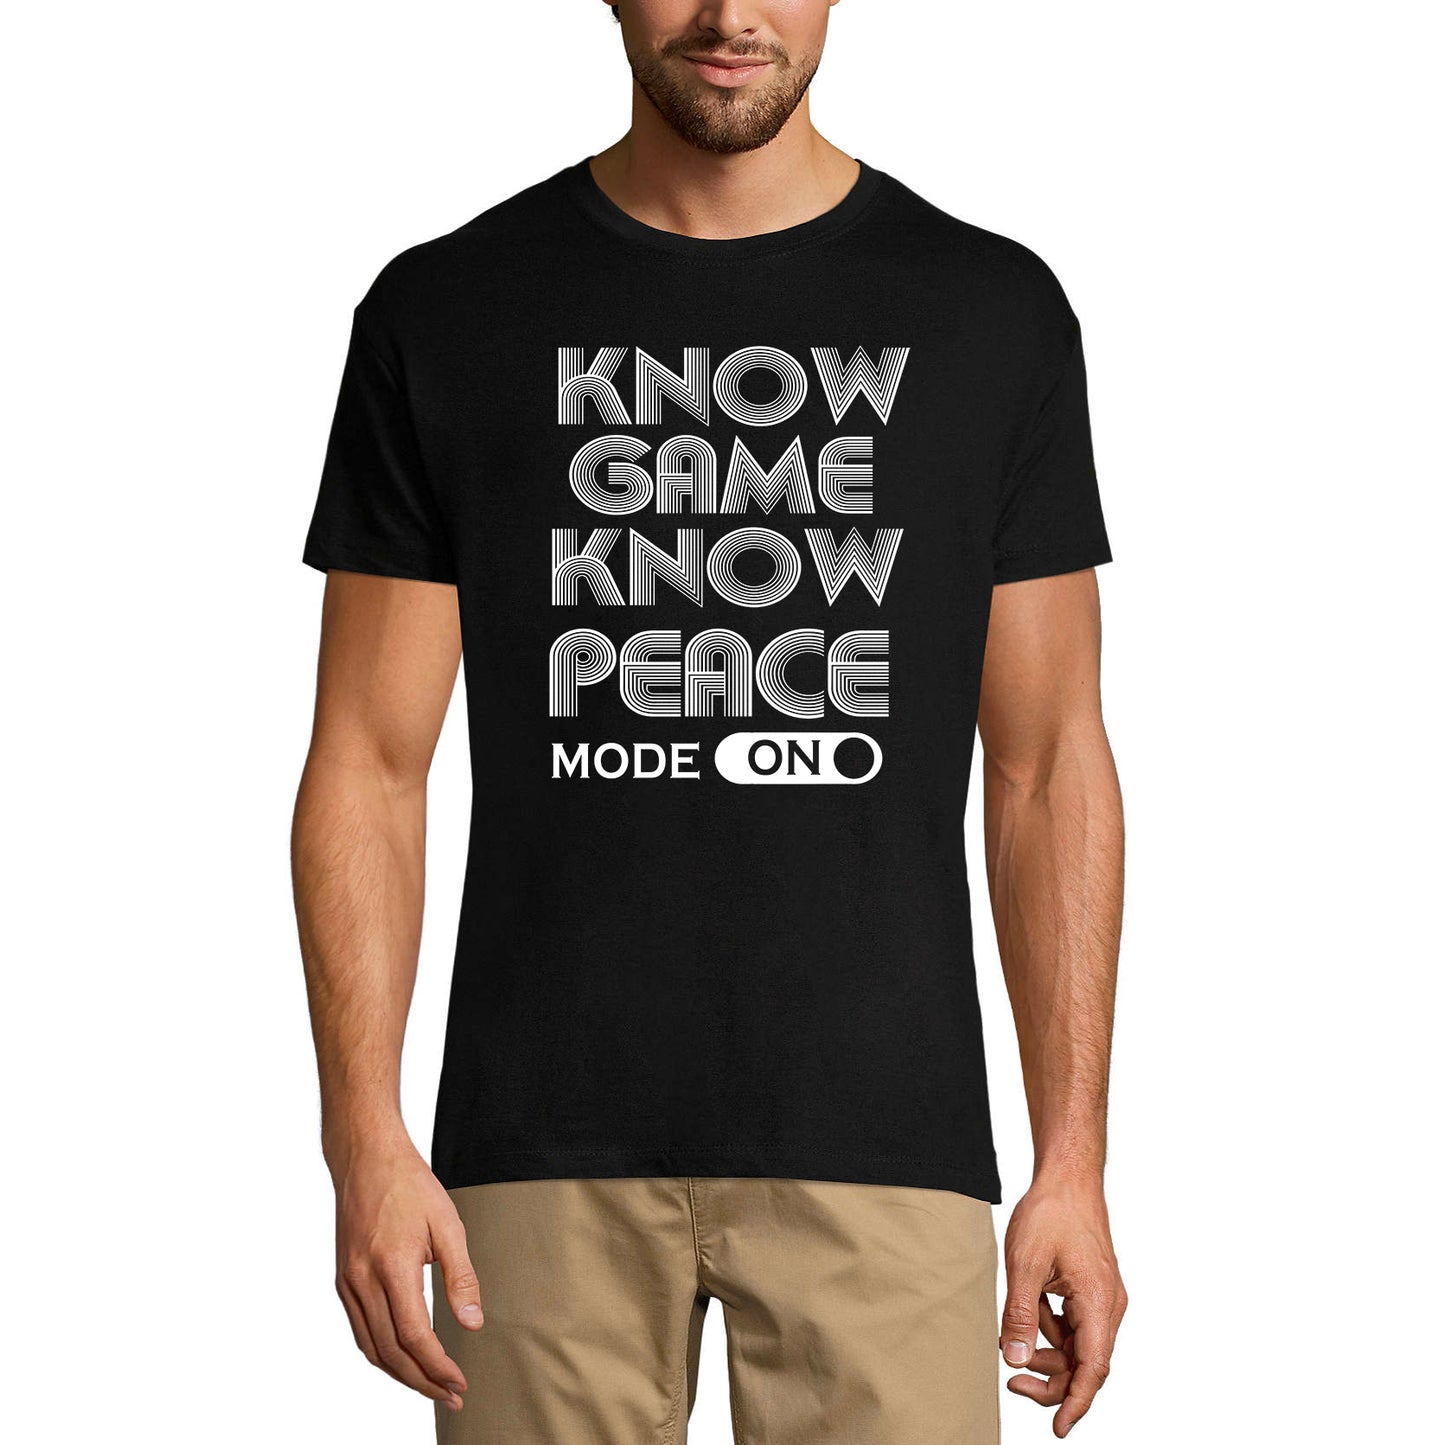 ULTRABASIC Men's Graphic T-Shirt Know Game Know Peace - Interesting Sayings mode on level up dad gamer i paused my game alien player ufo playstation tee shirt clothes gaming apparel gifts super mario nintendo call of duty graphic tshirt video game funny geek gift for the gamer fortnite pubg humor son father birthday